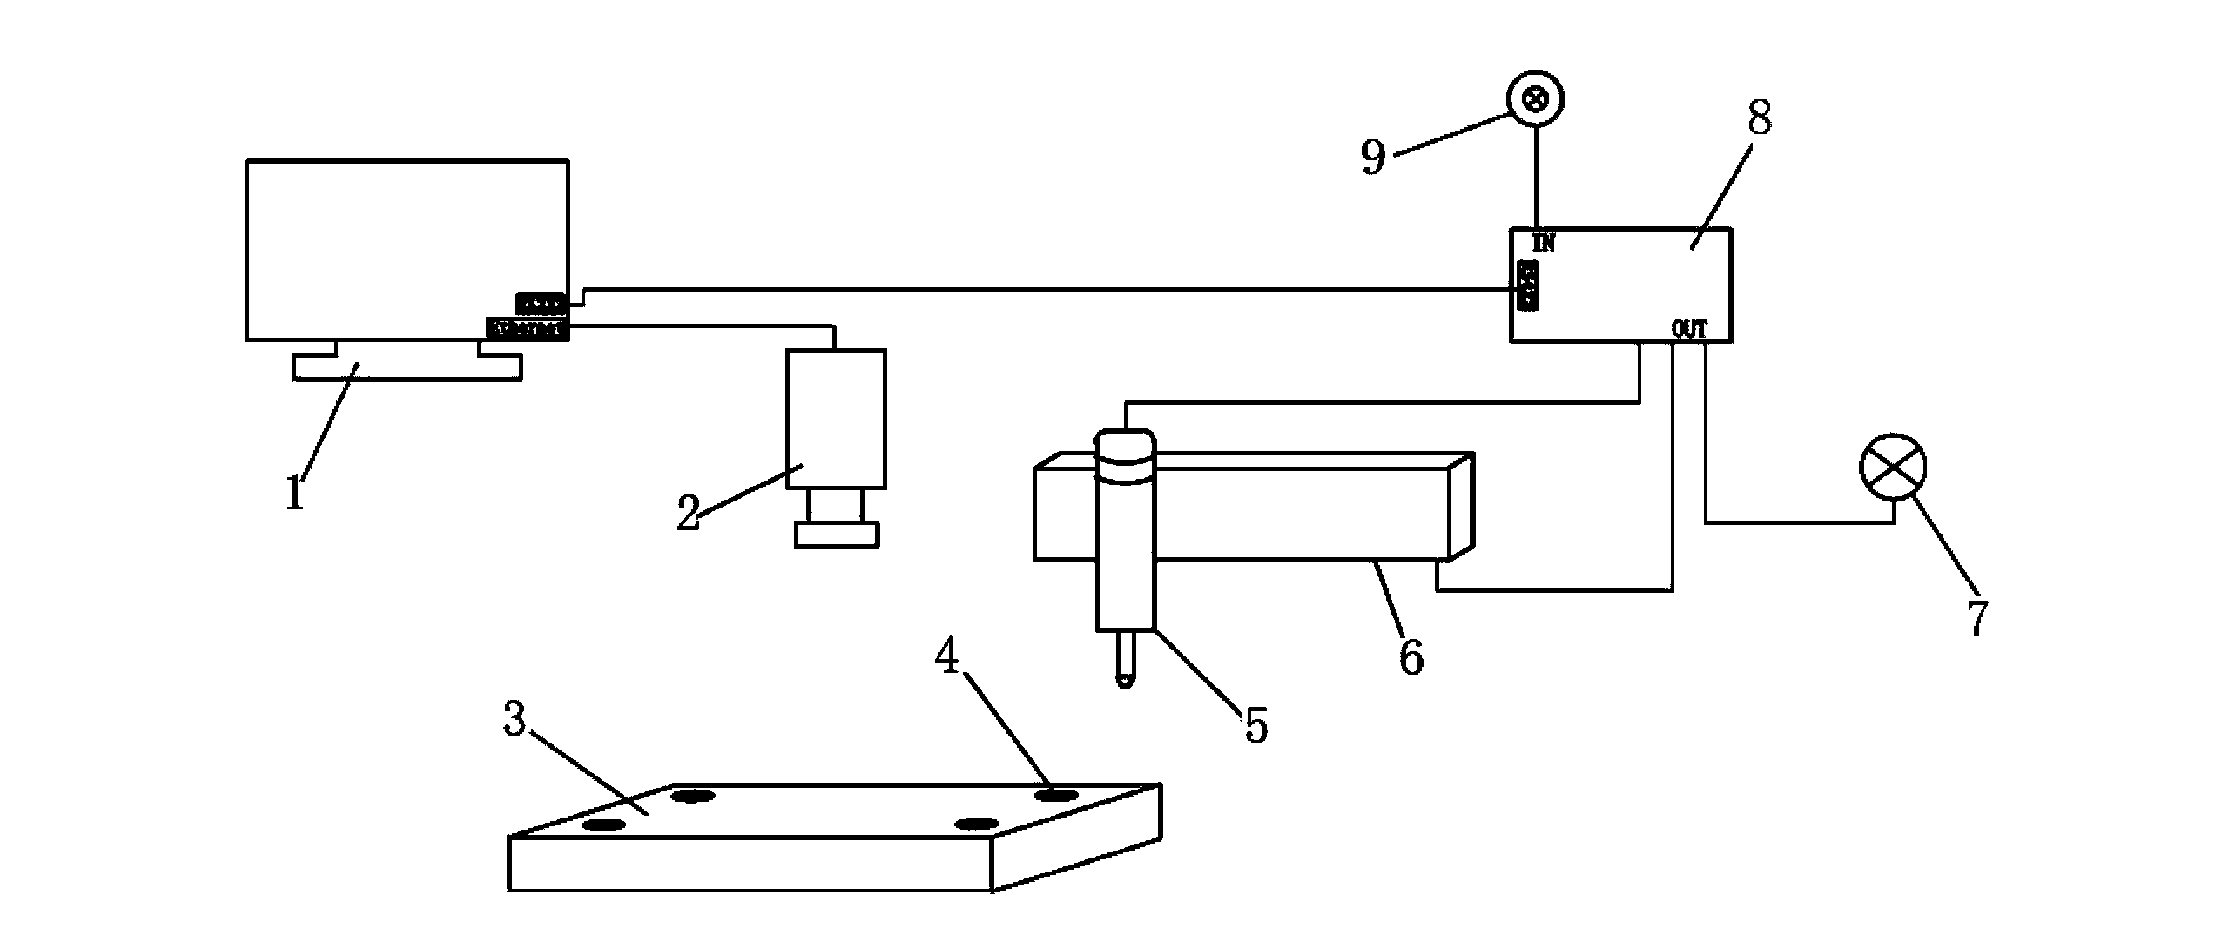 Automatic screw locking device based on computer vision